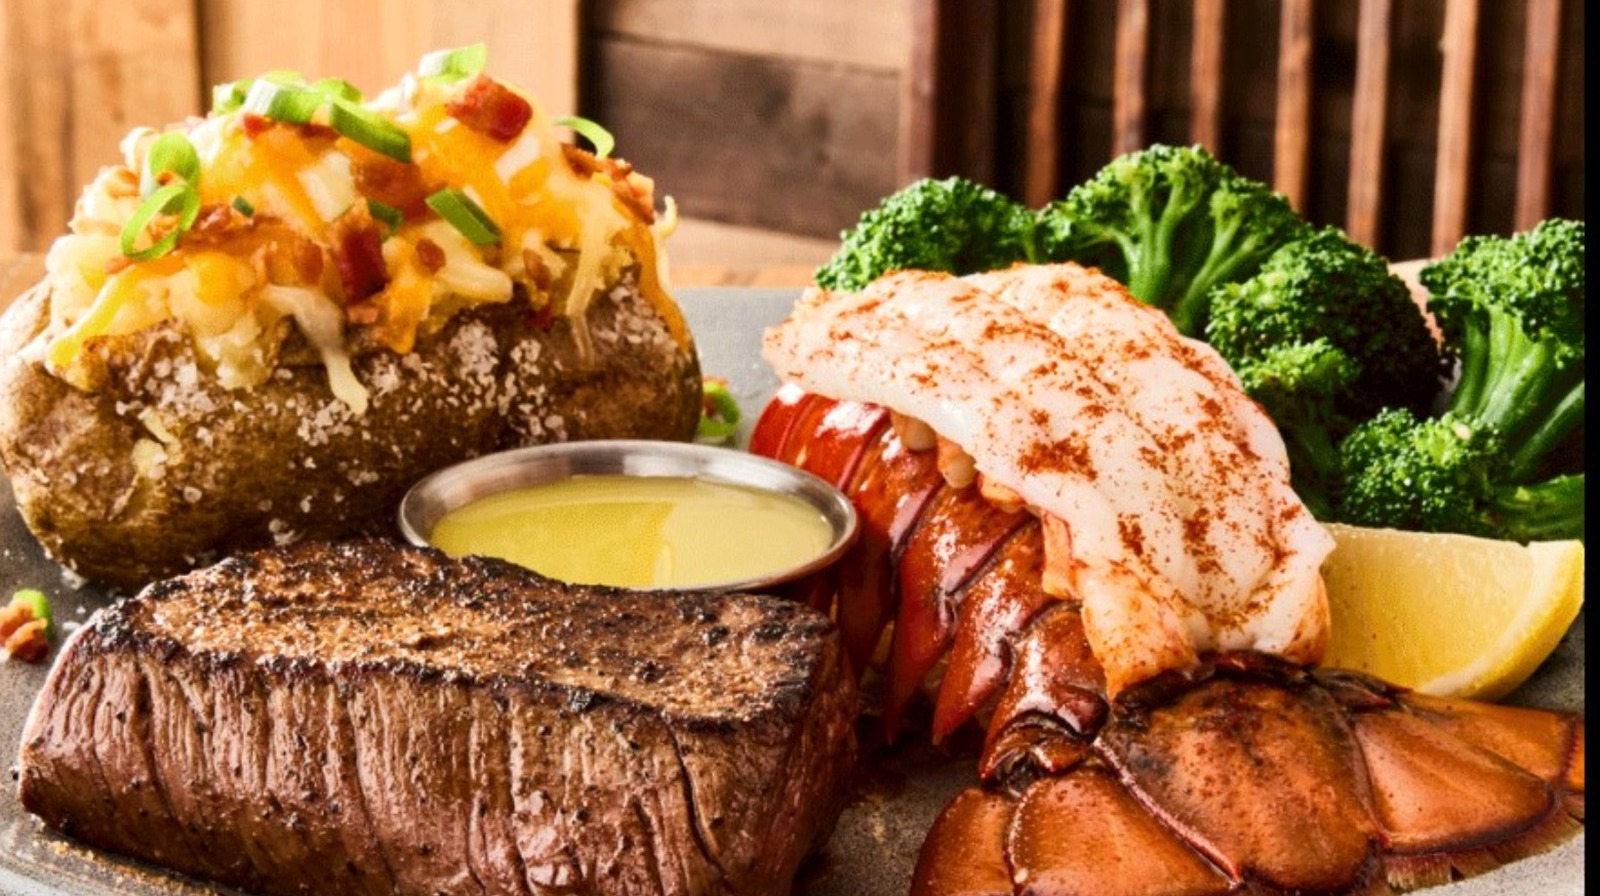 https://www.thedailymeal.com/img/gallery/the-healthiest-menu-items-at-outback-steakhouse-upgrade/l-intro-1679581686.jpg